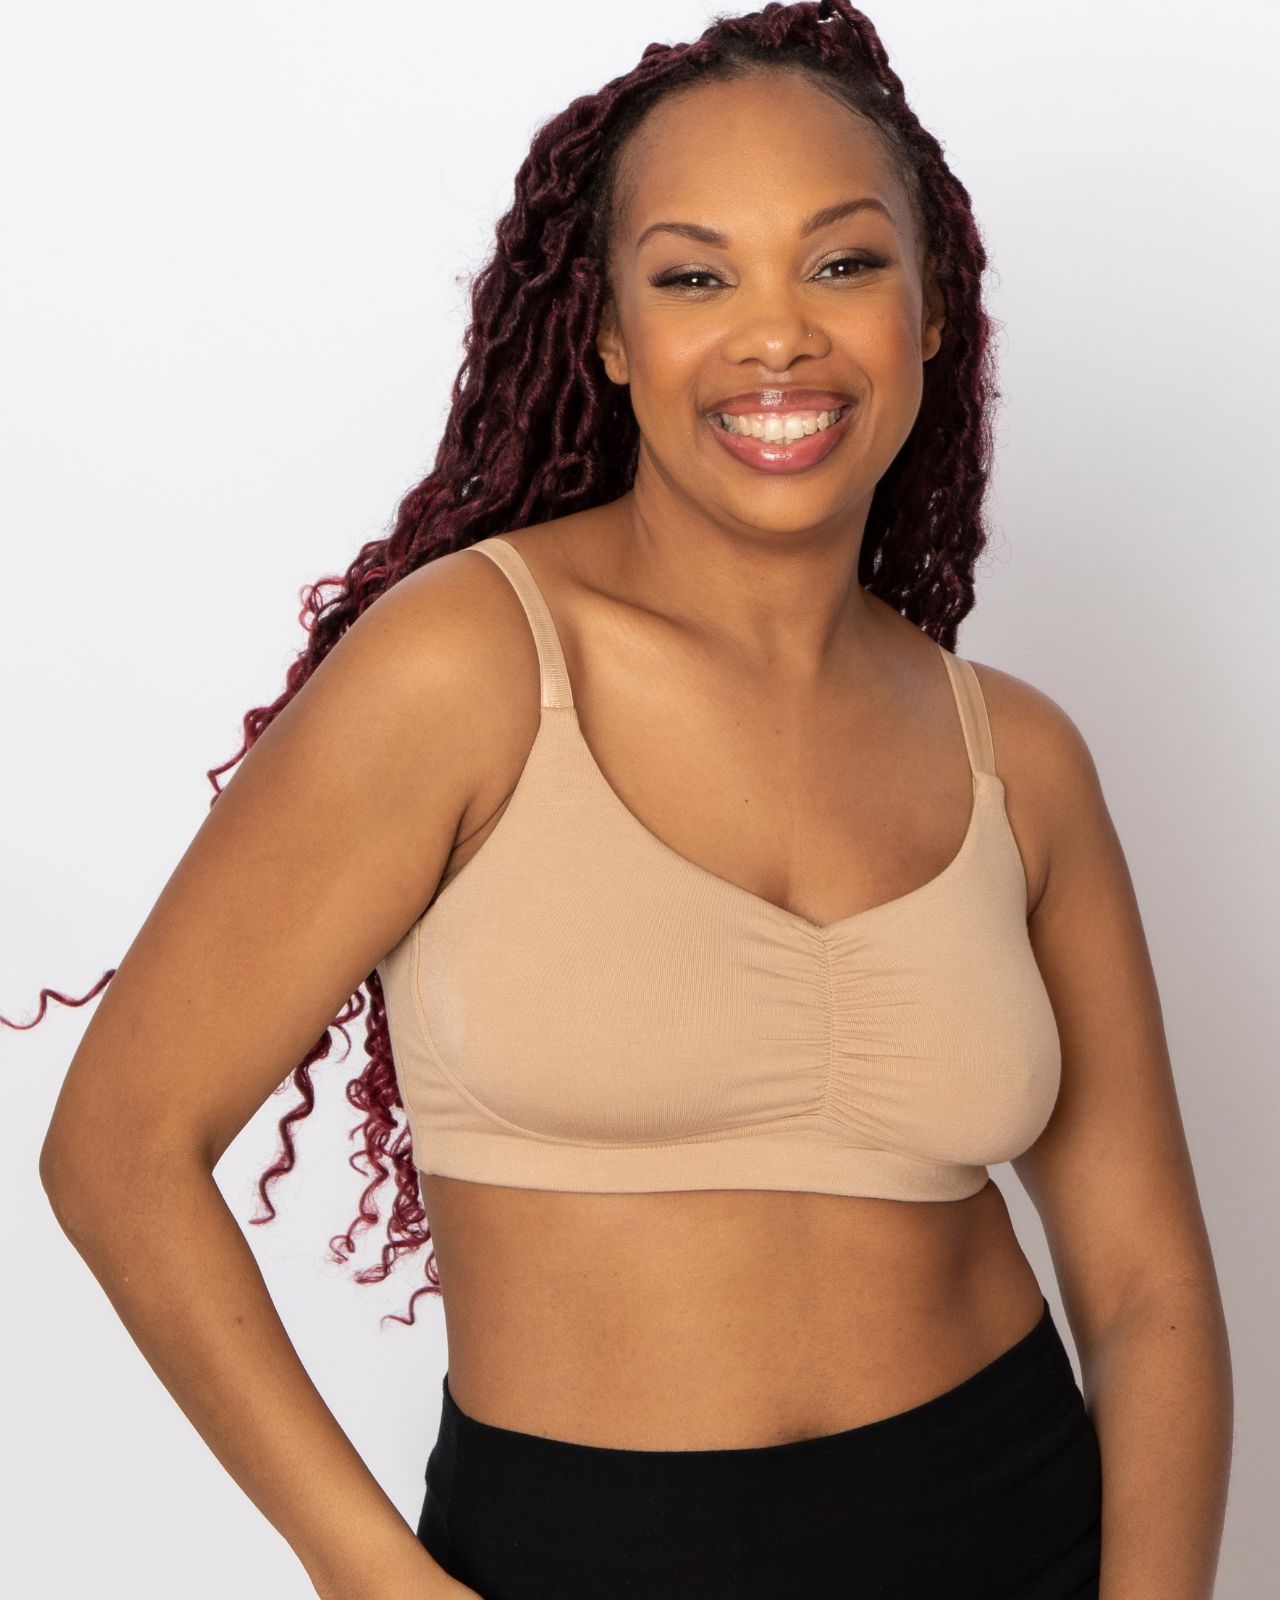 Black woman smiling and wearing a tan colored bra